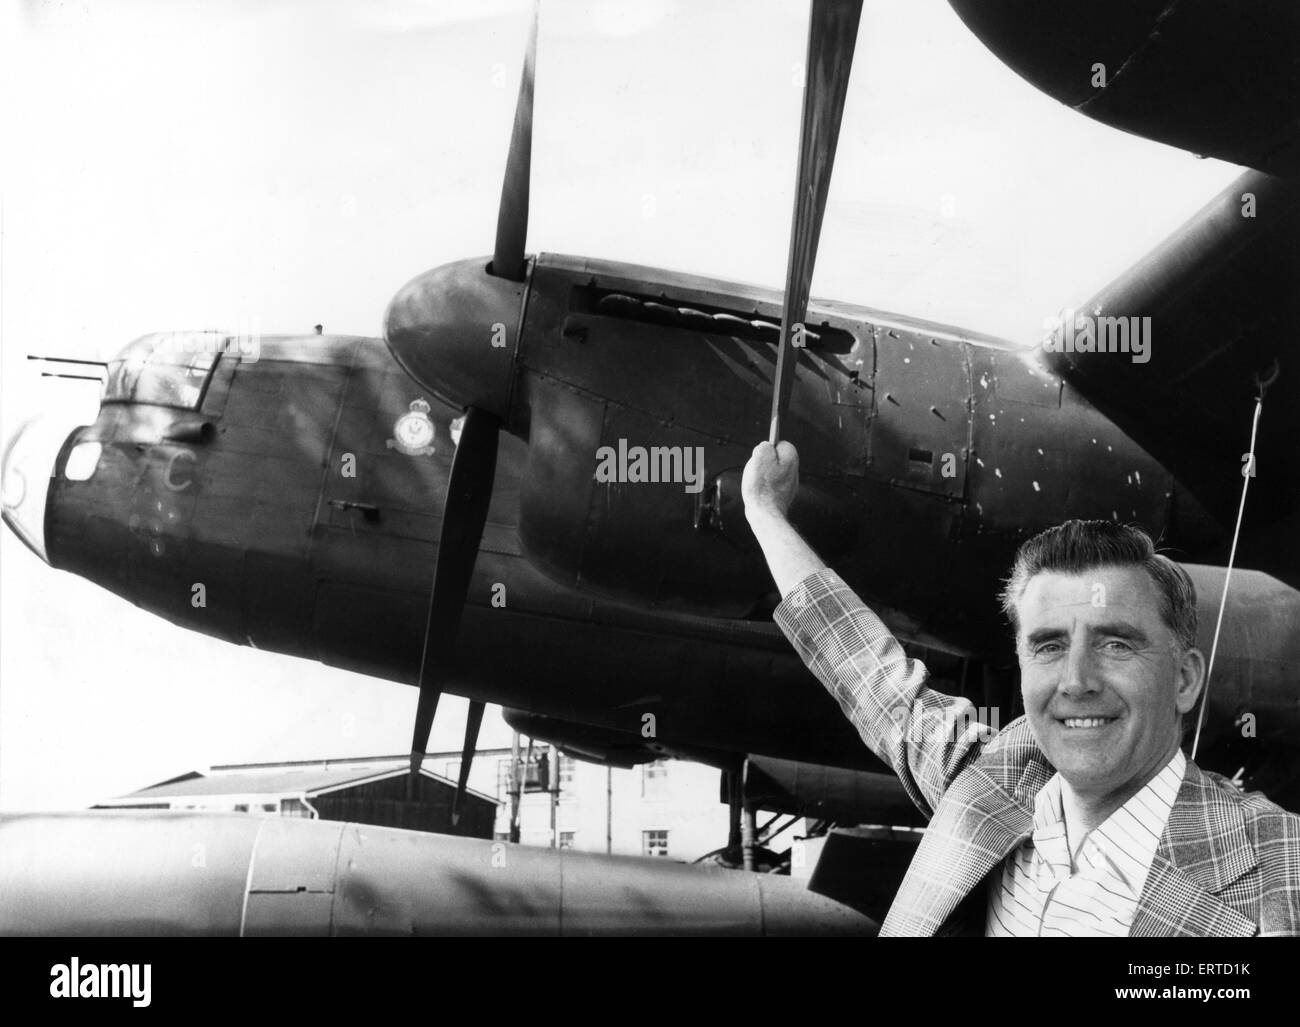 Former RAF flight engineer Alan Morgan in Lancasters, poses beside one of the famous Avro Lancaster bombers at the gate at RAF Scampton. 20th May 1980. Stock Photo